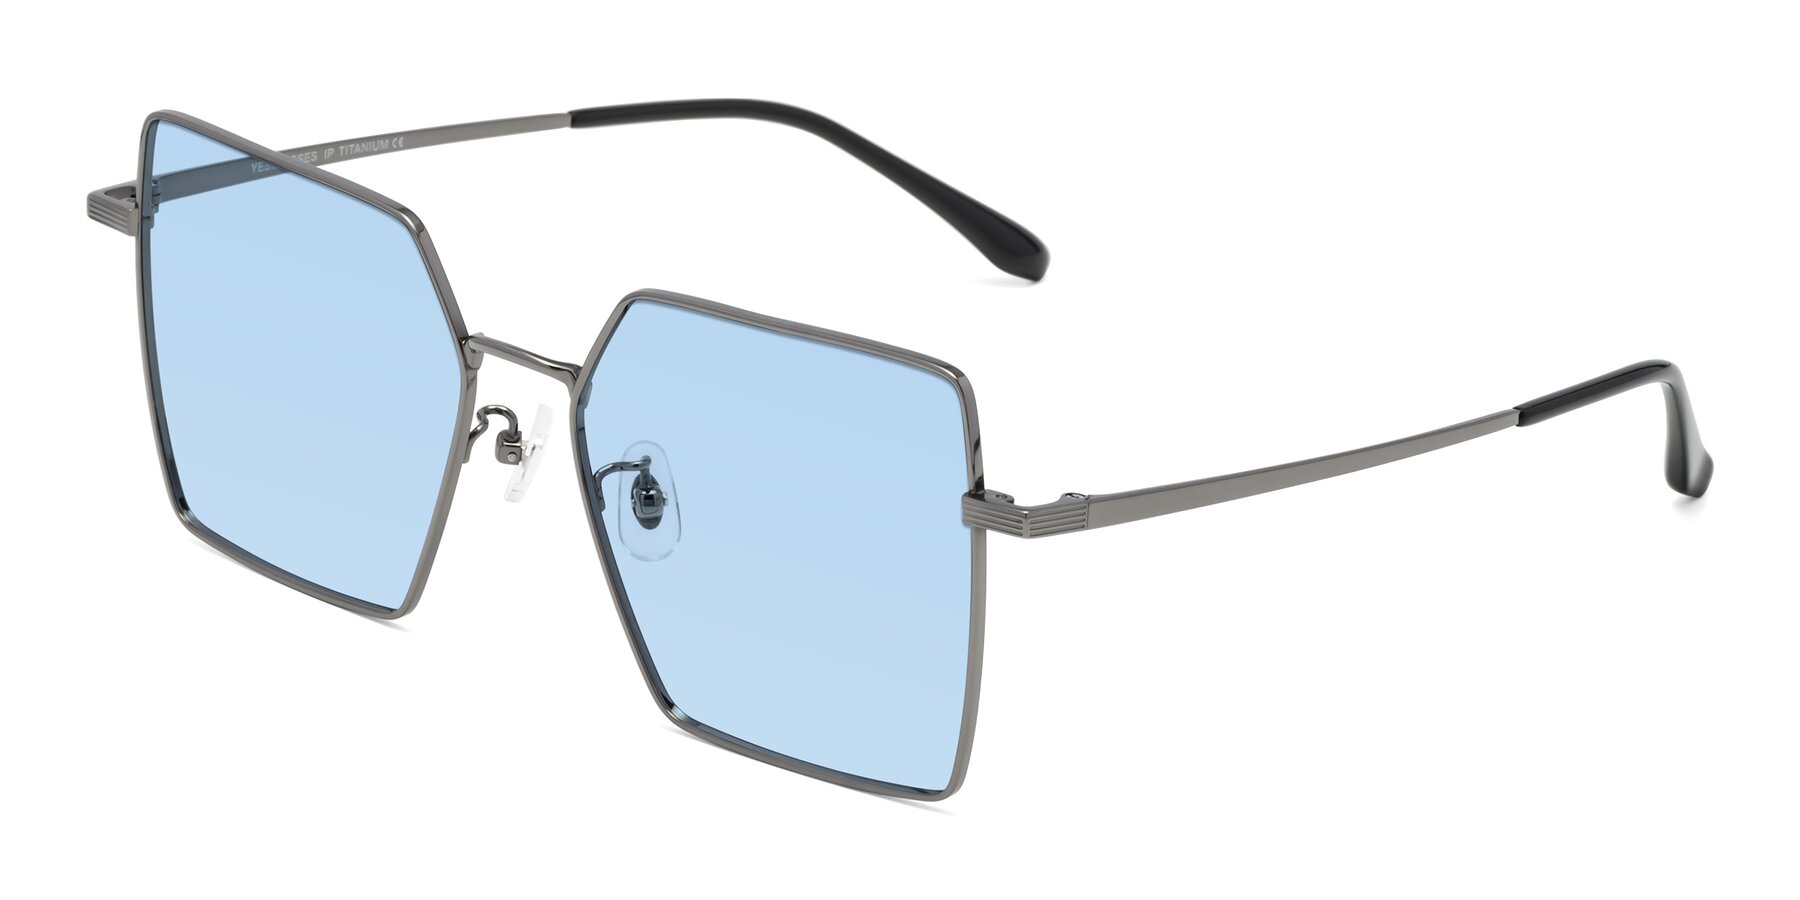 Angle of La Villa in Gunmetal with Light Blue Tinted Lenses